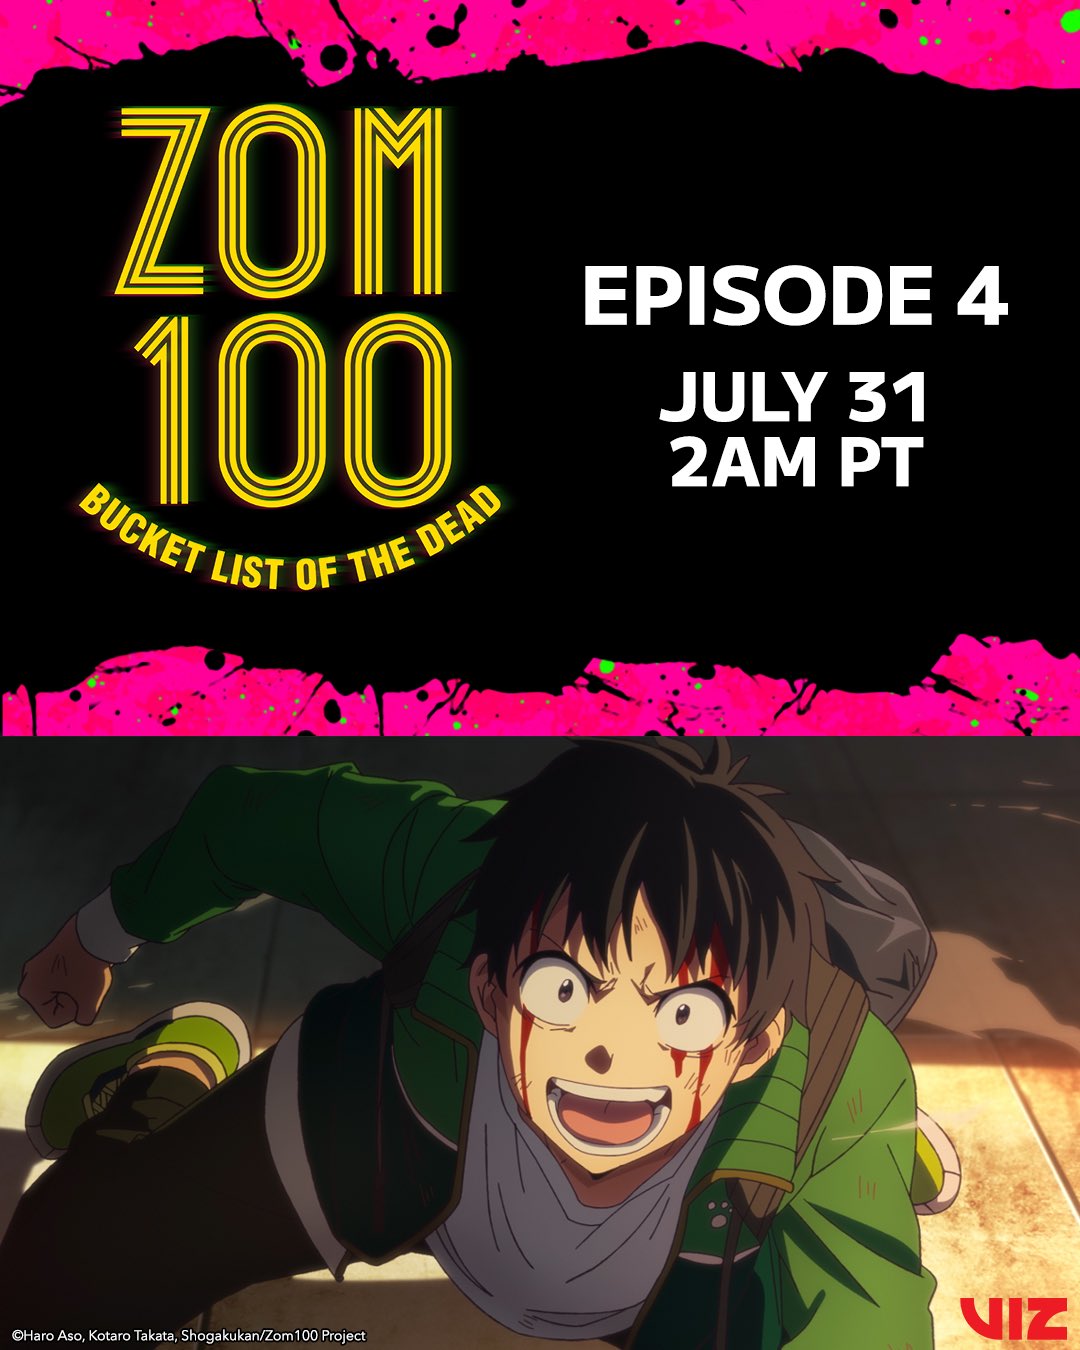 Zom 100 Fourth Episode Not on time on Streaming Platforms